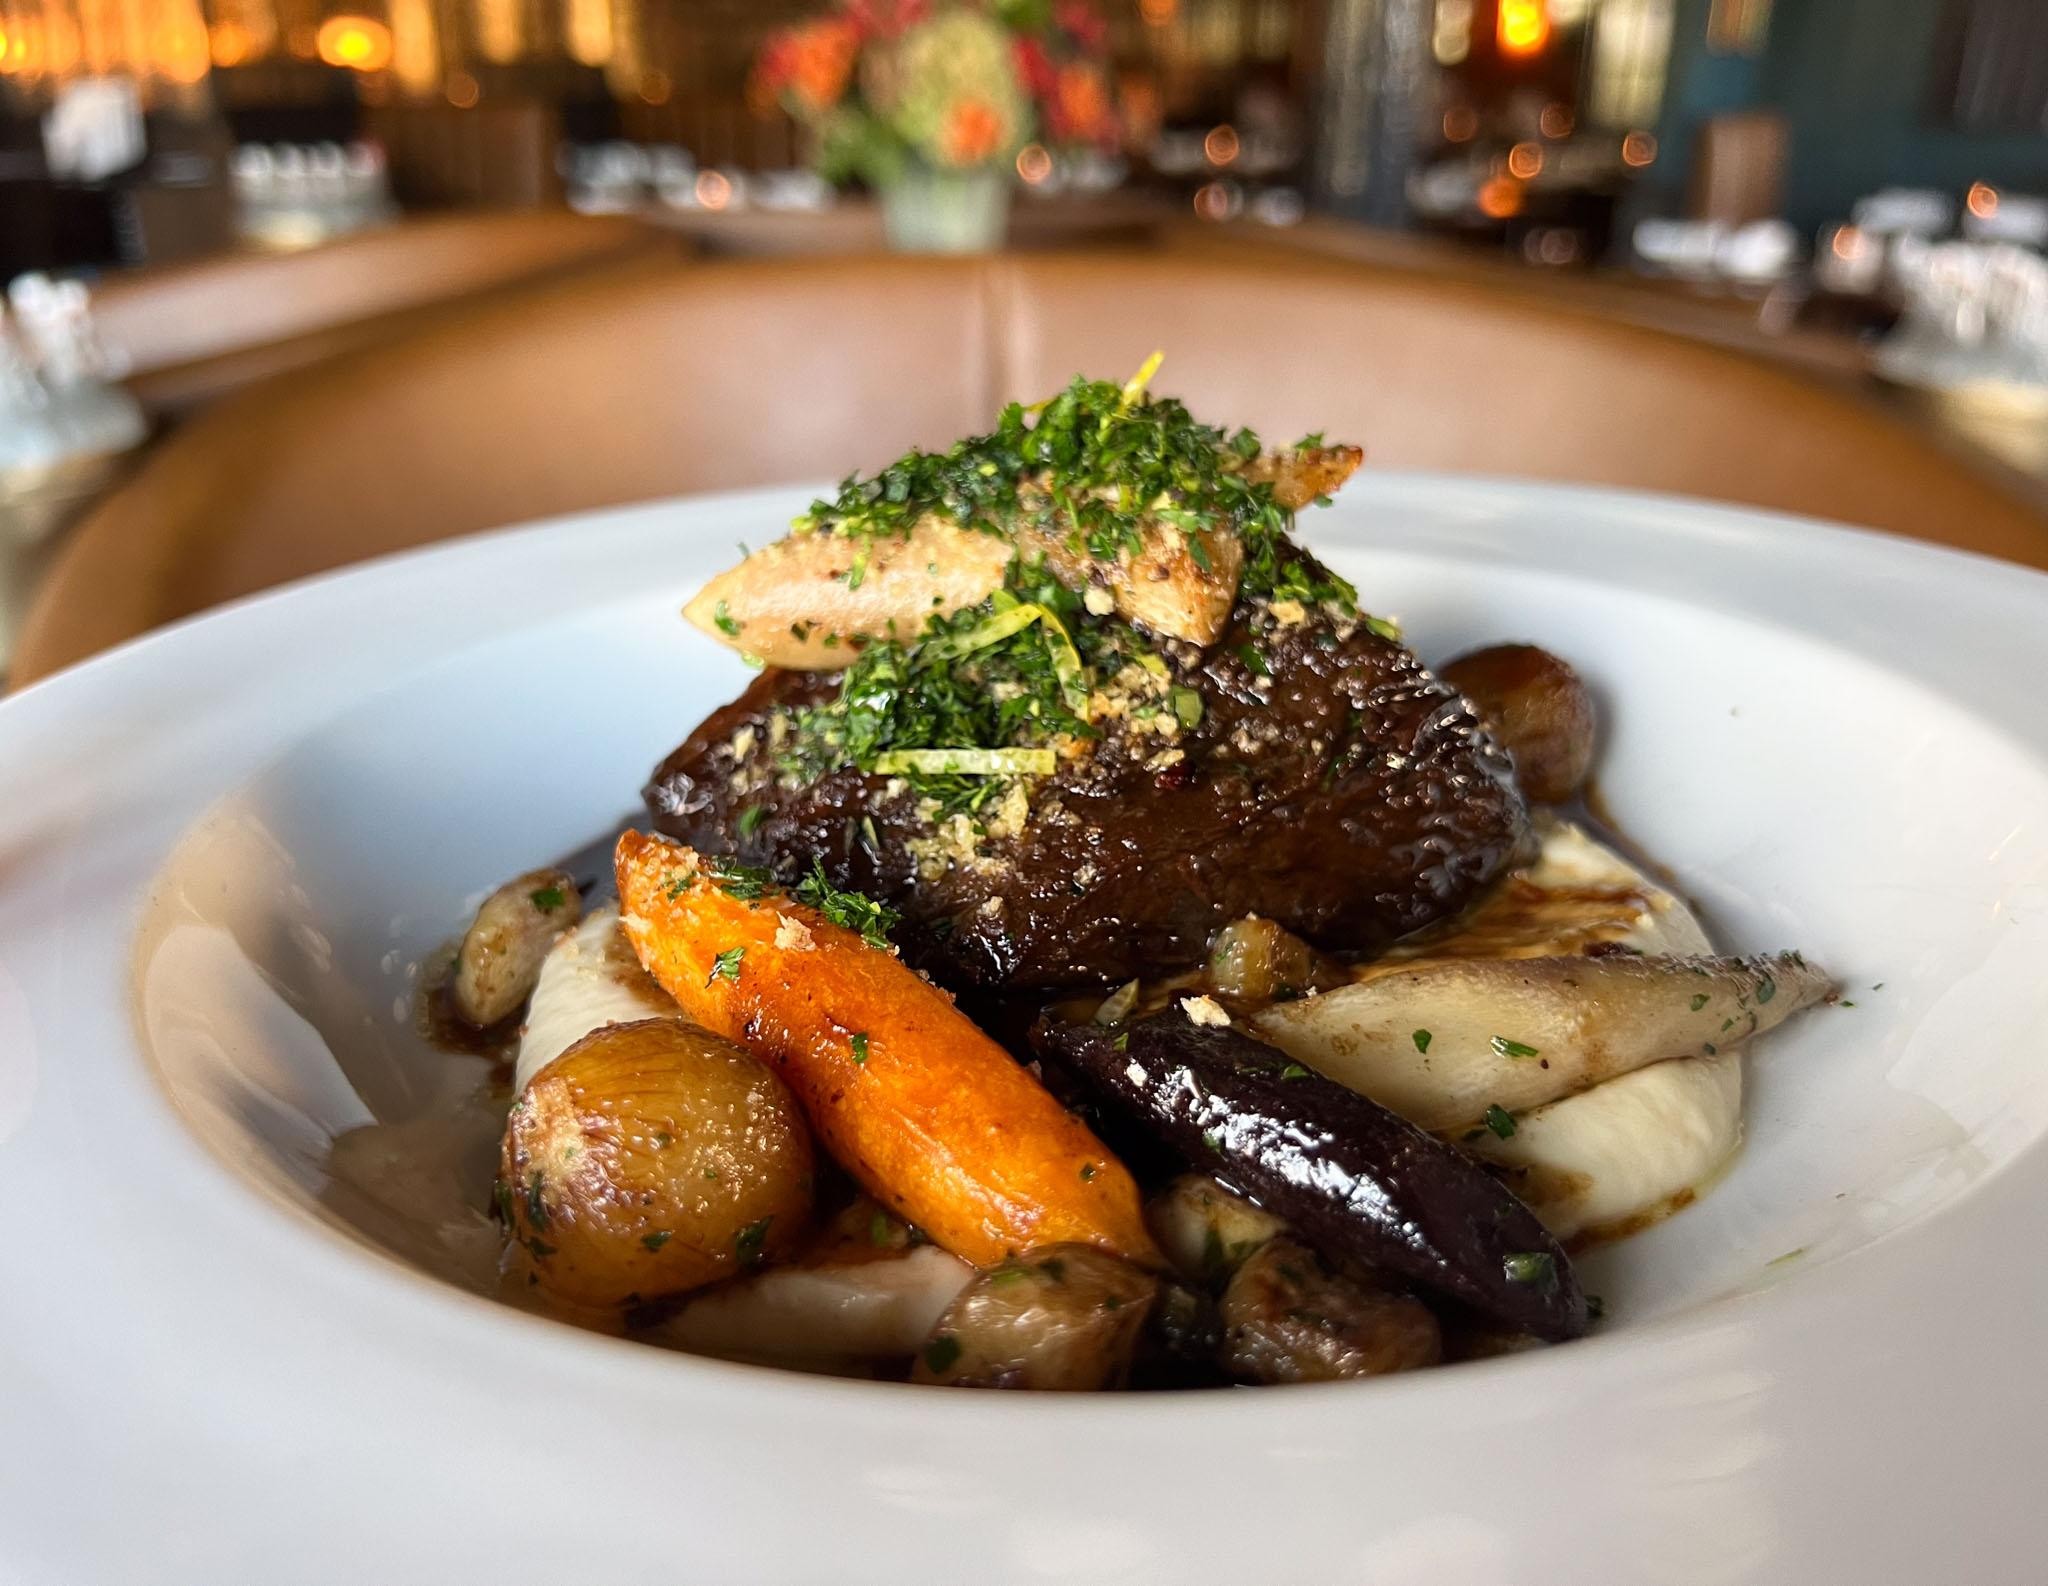 Braised Short Rib - Only Available on Wednesdays